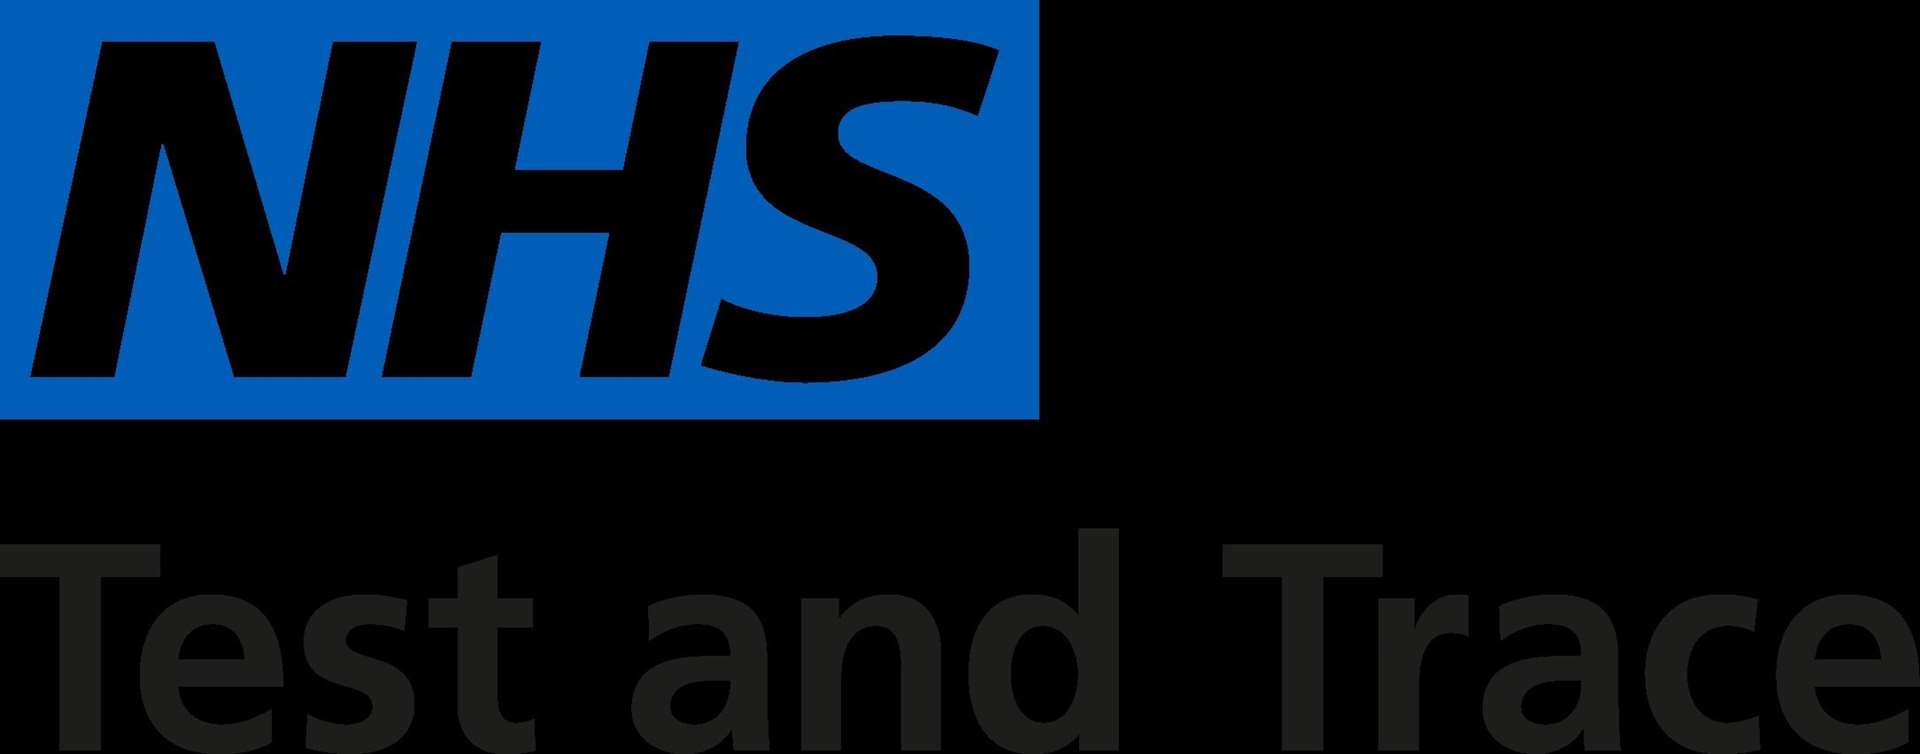 NHS Test and Trace can help notify close contacts of a positive case